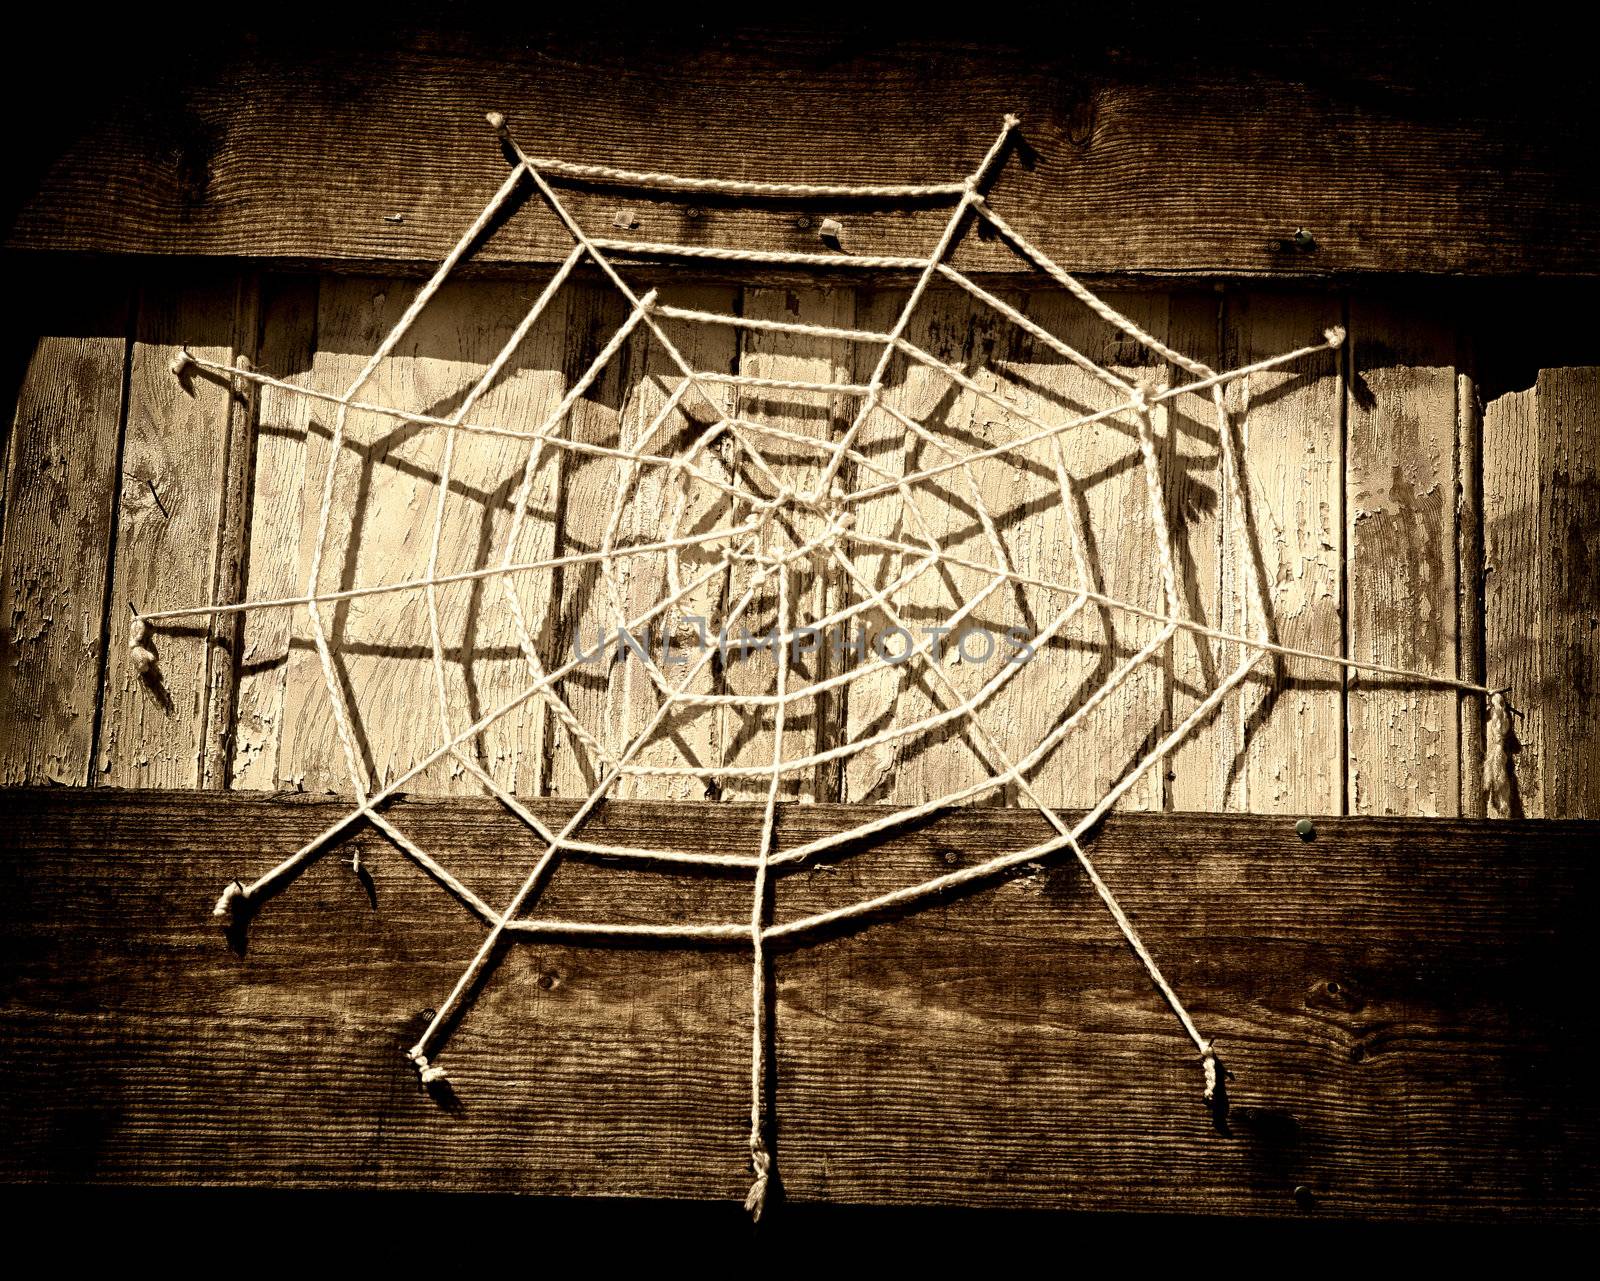 Spider web by ABCDK